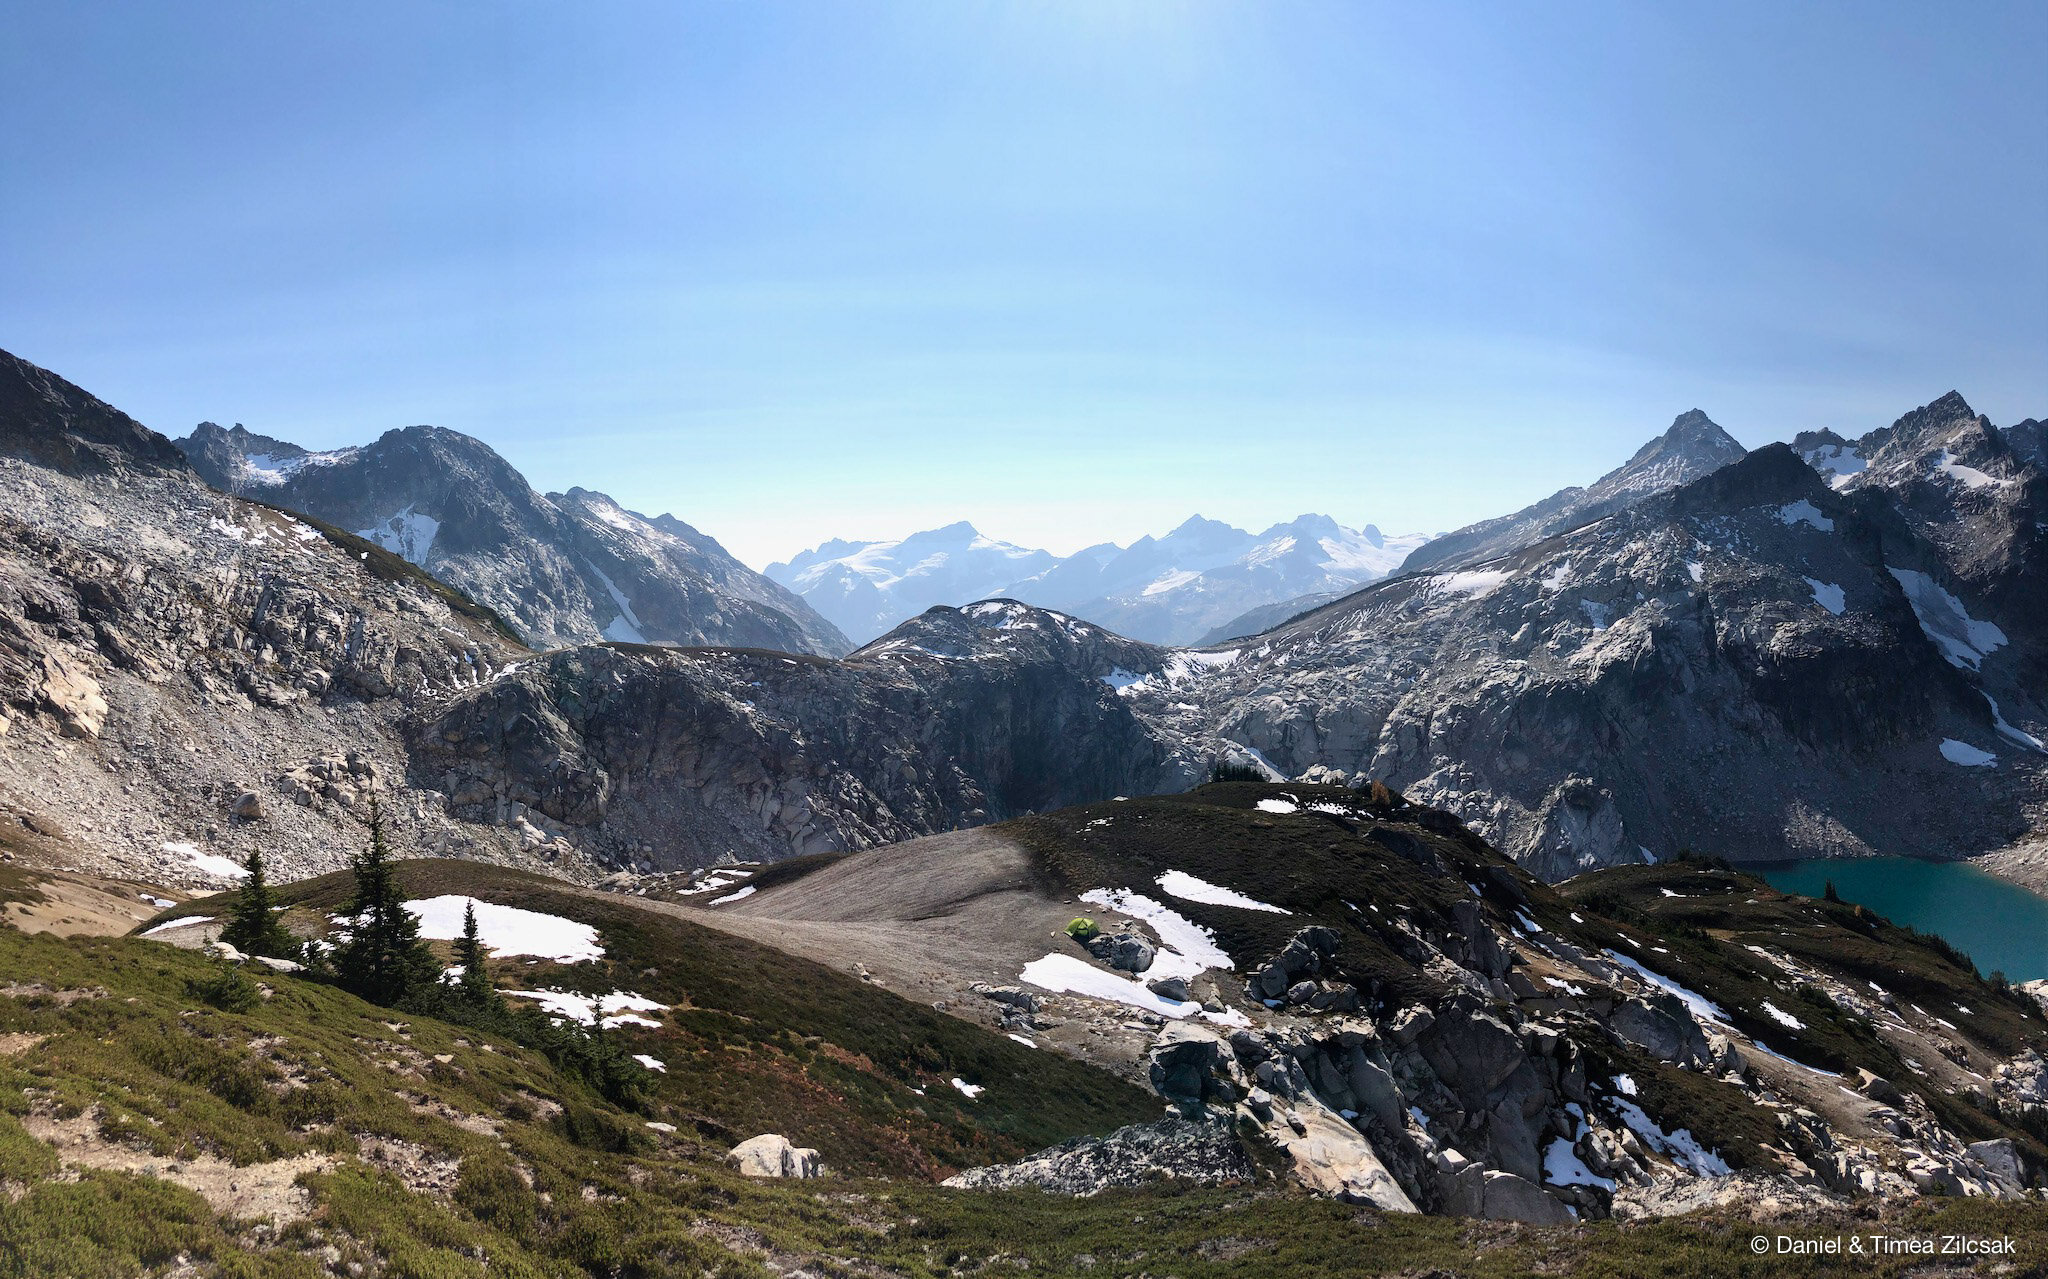 View of High Pass from the High Pass trail